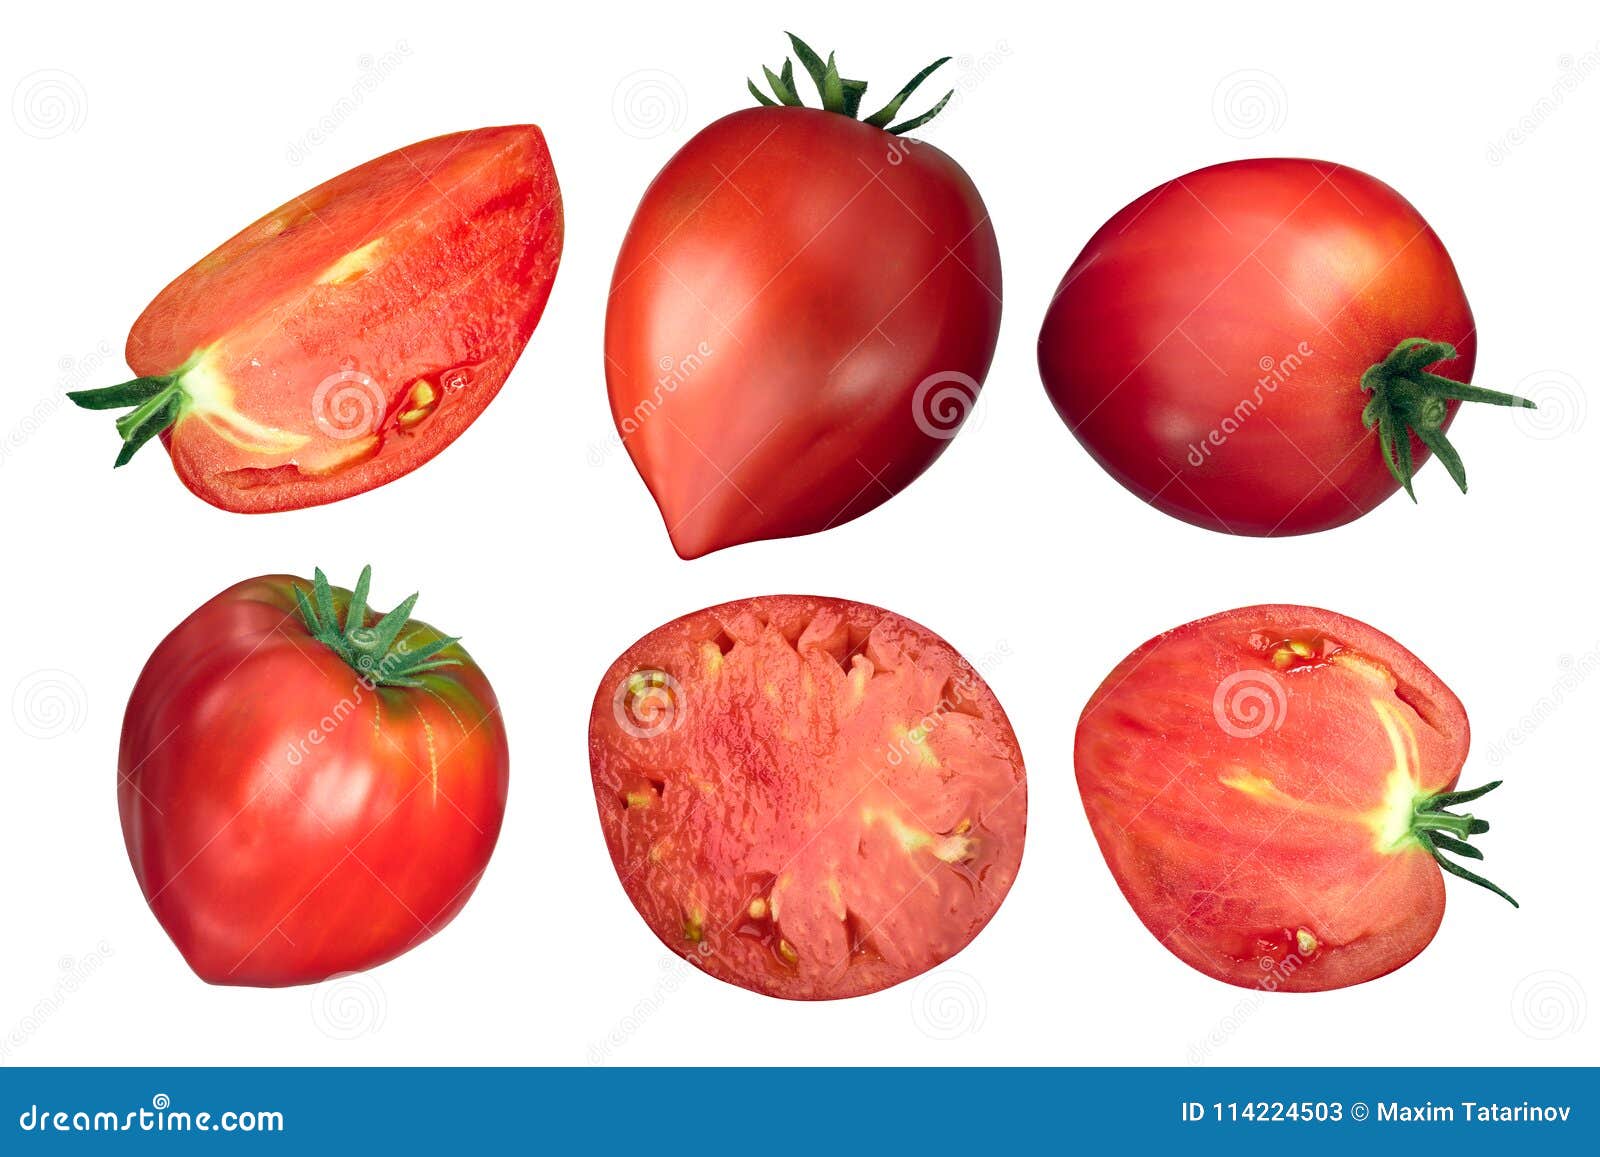 oxheart ox heart tomatoes, top view